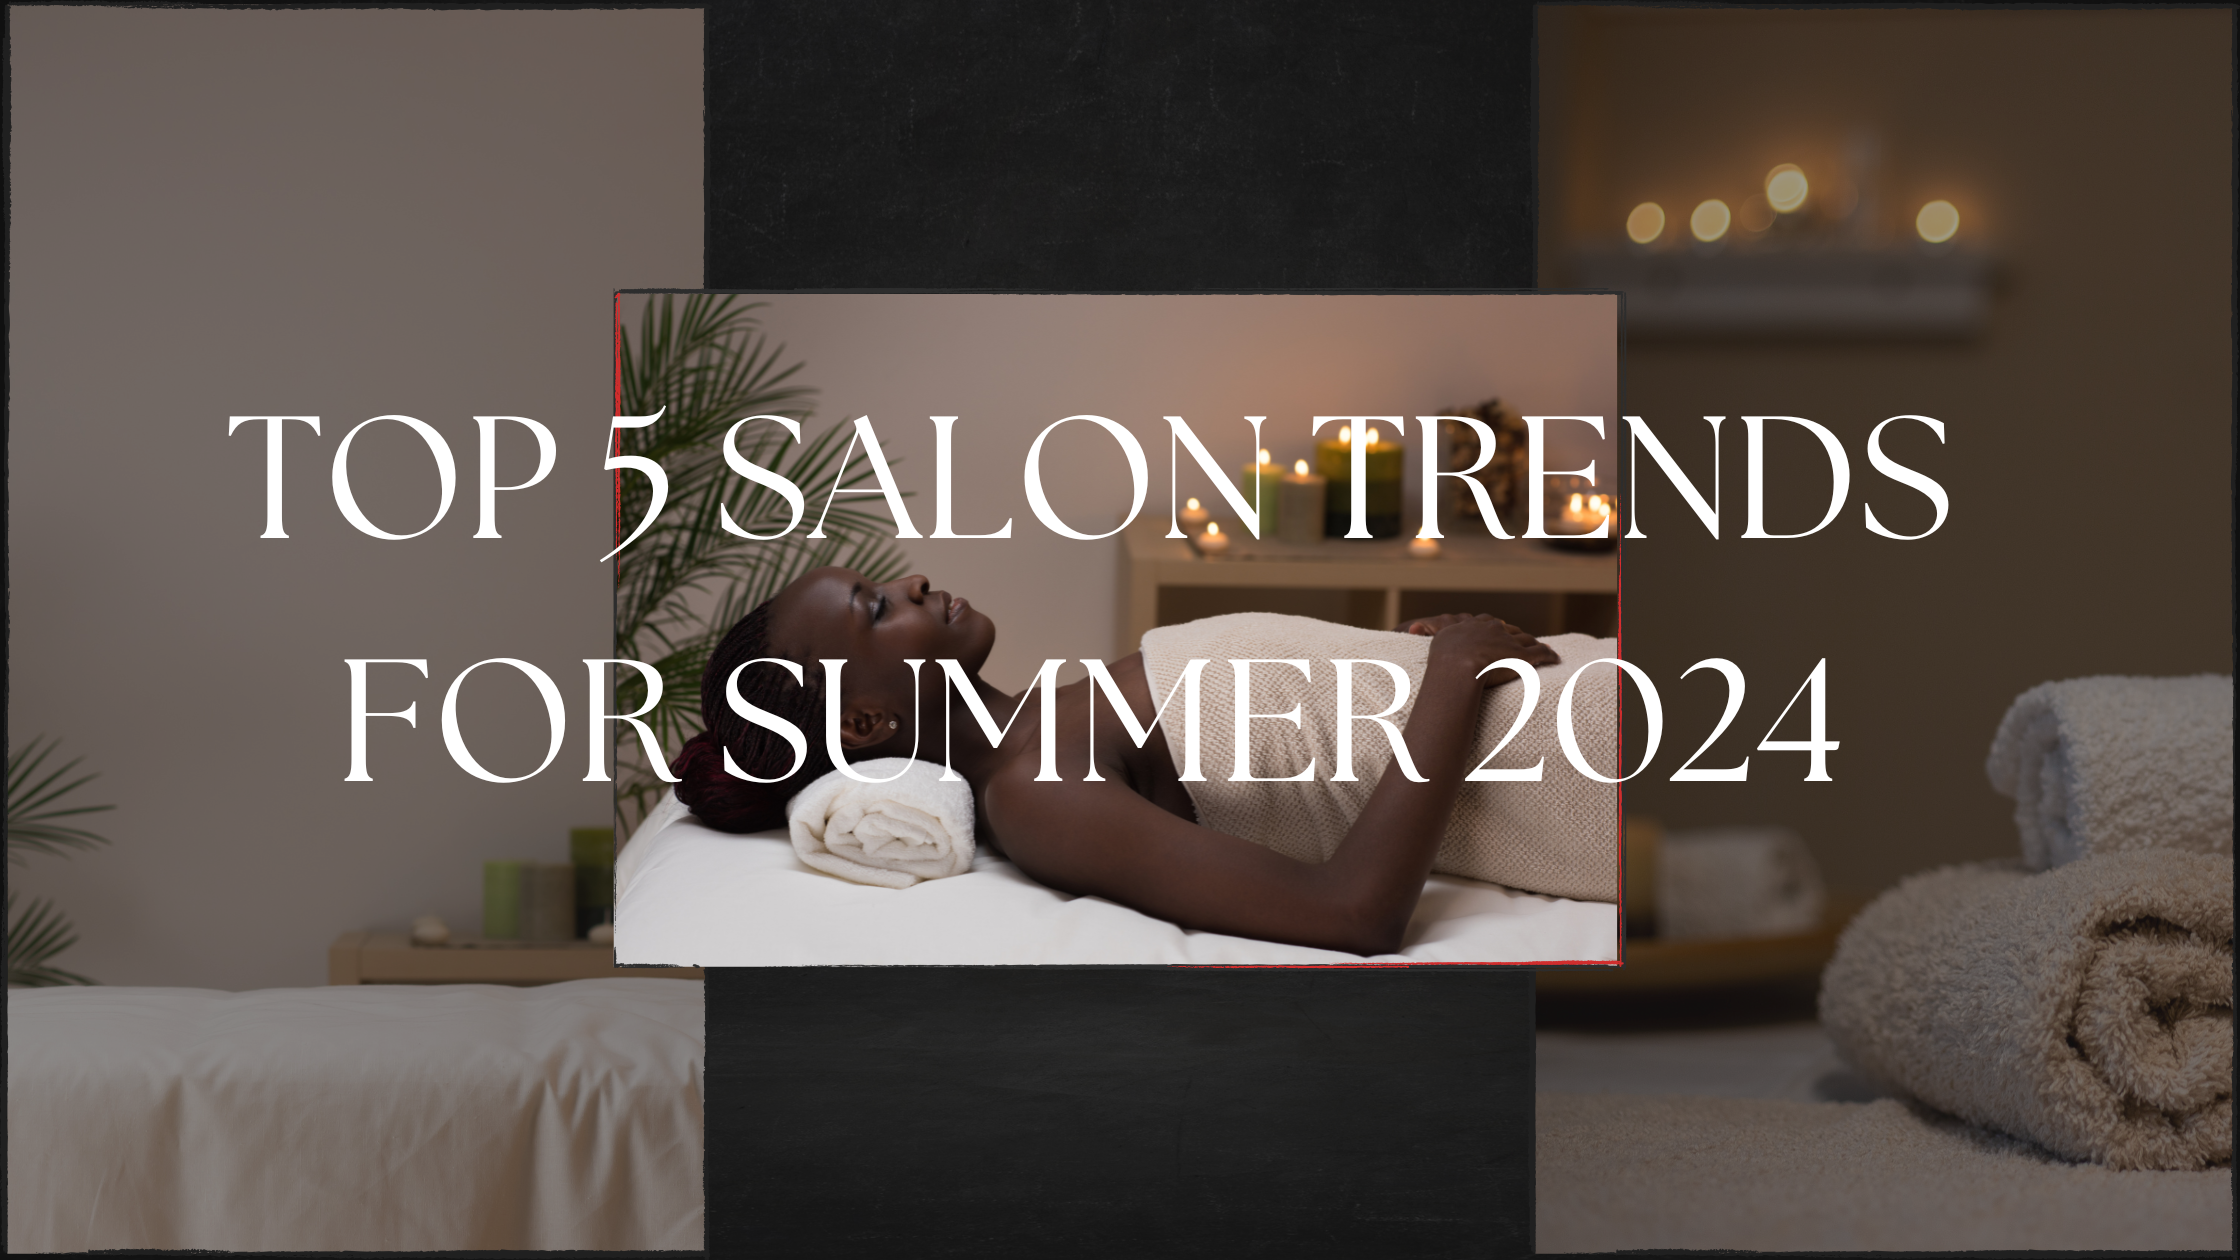 Stay Ahead of the Curve: Top 5 Salon Trends for Summer 2024